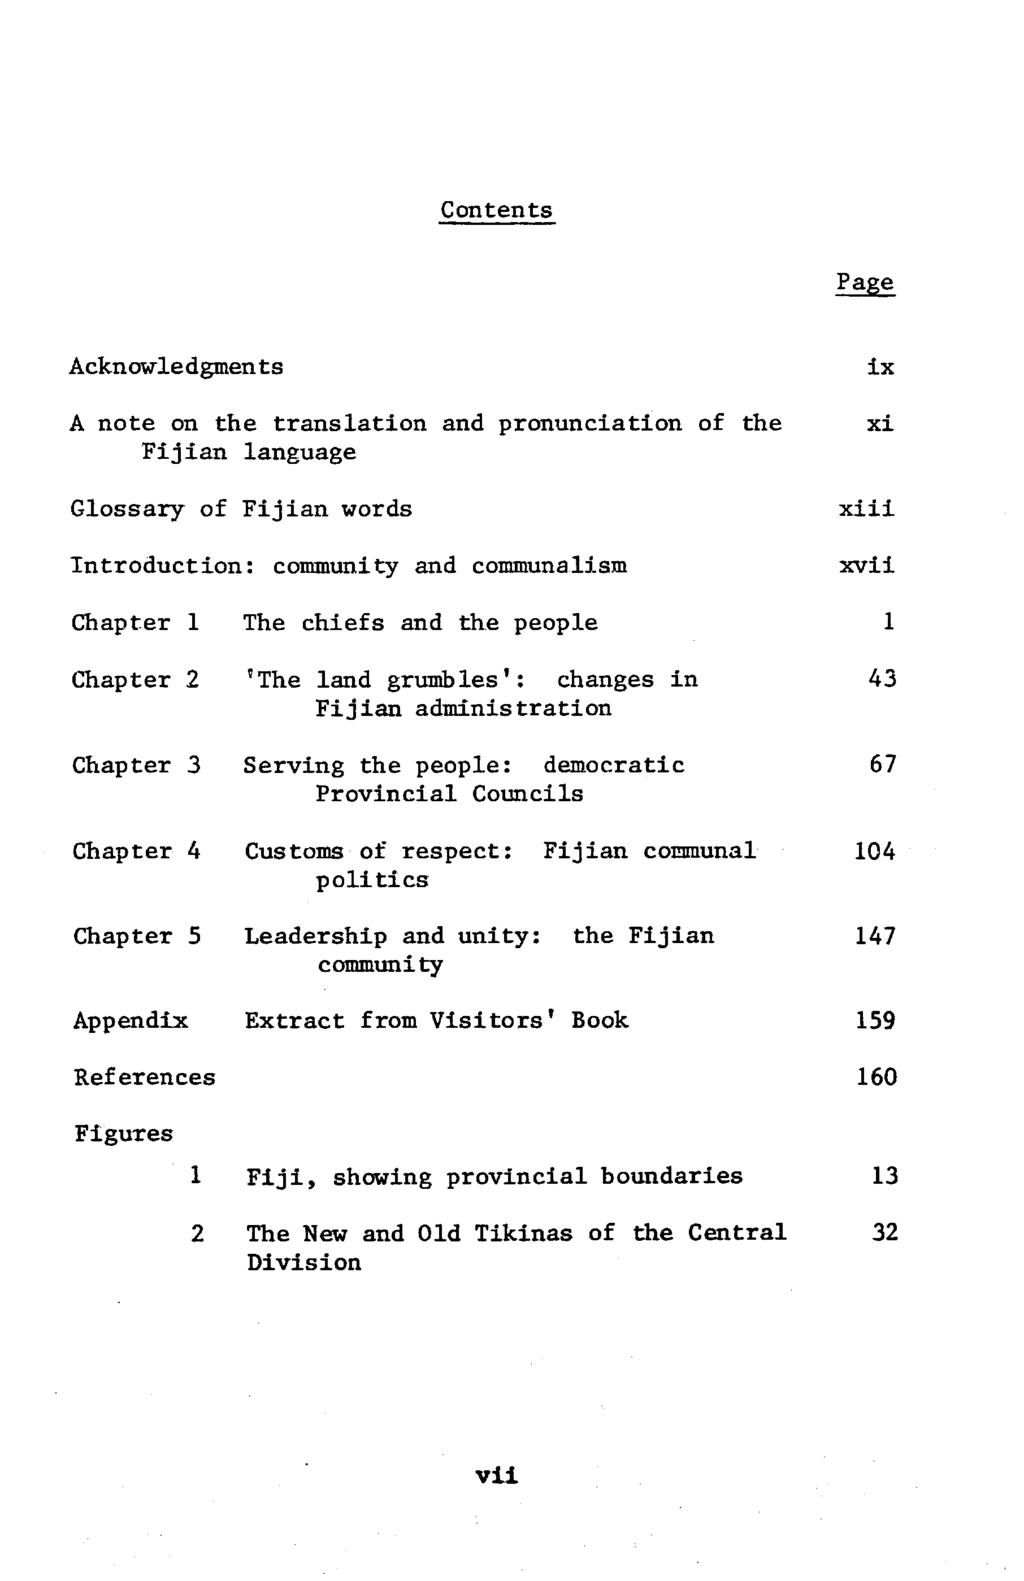 Contents Page Acknowledgments A note on the translation and pronunciation of the Fijian language Glossary of Fijian words Introduction: community and communalism ix xi xiii xvii Chapter 1 The chiefs